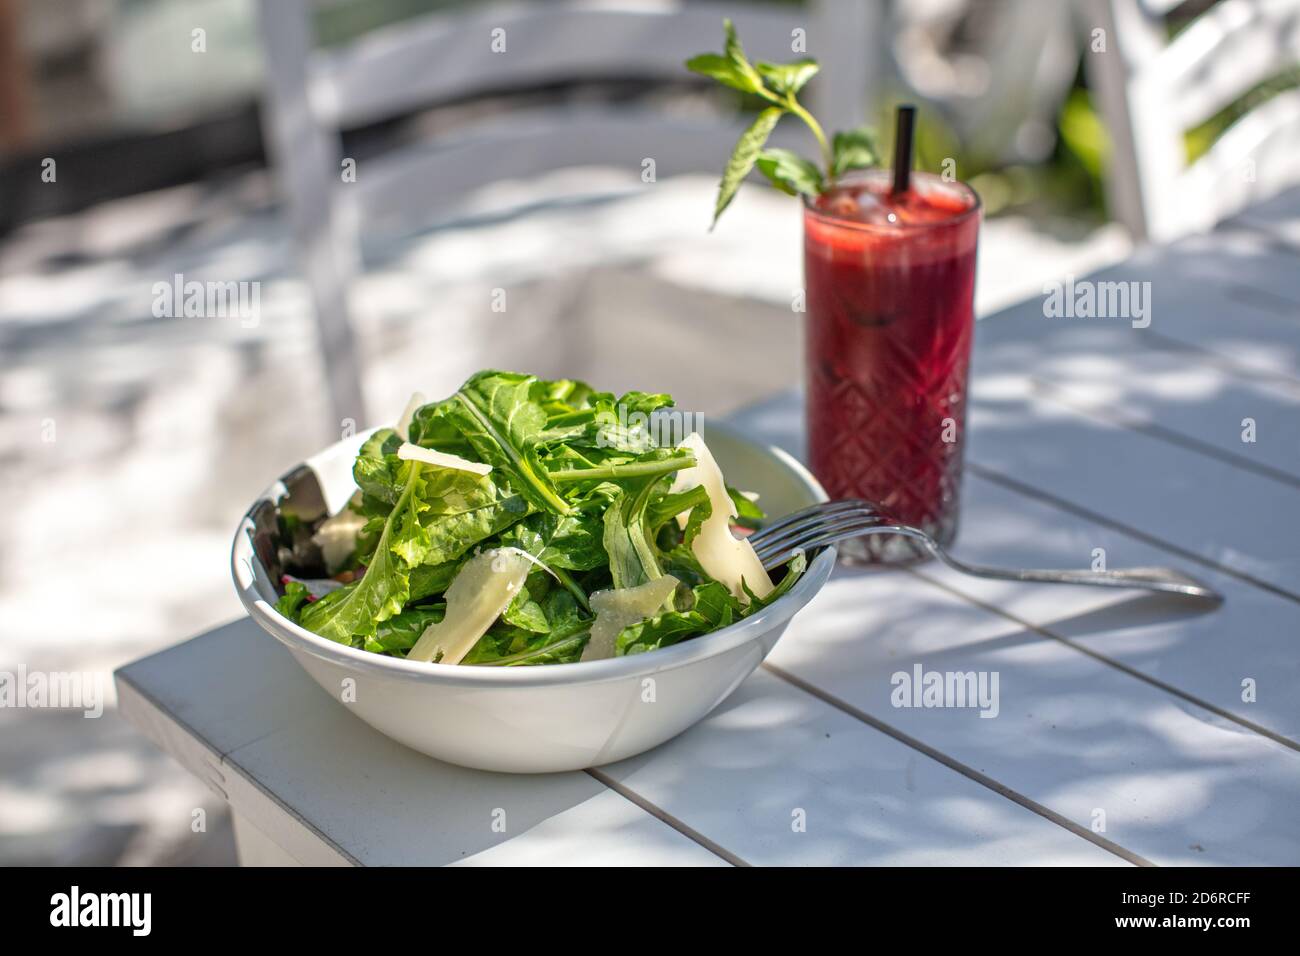 Fresh Green Salad with Cheese at Garden Stock Photo